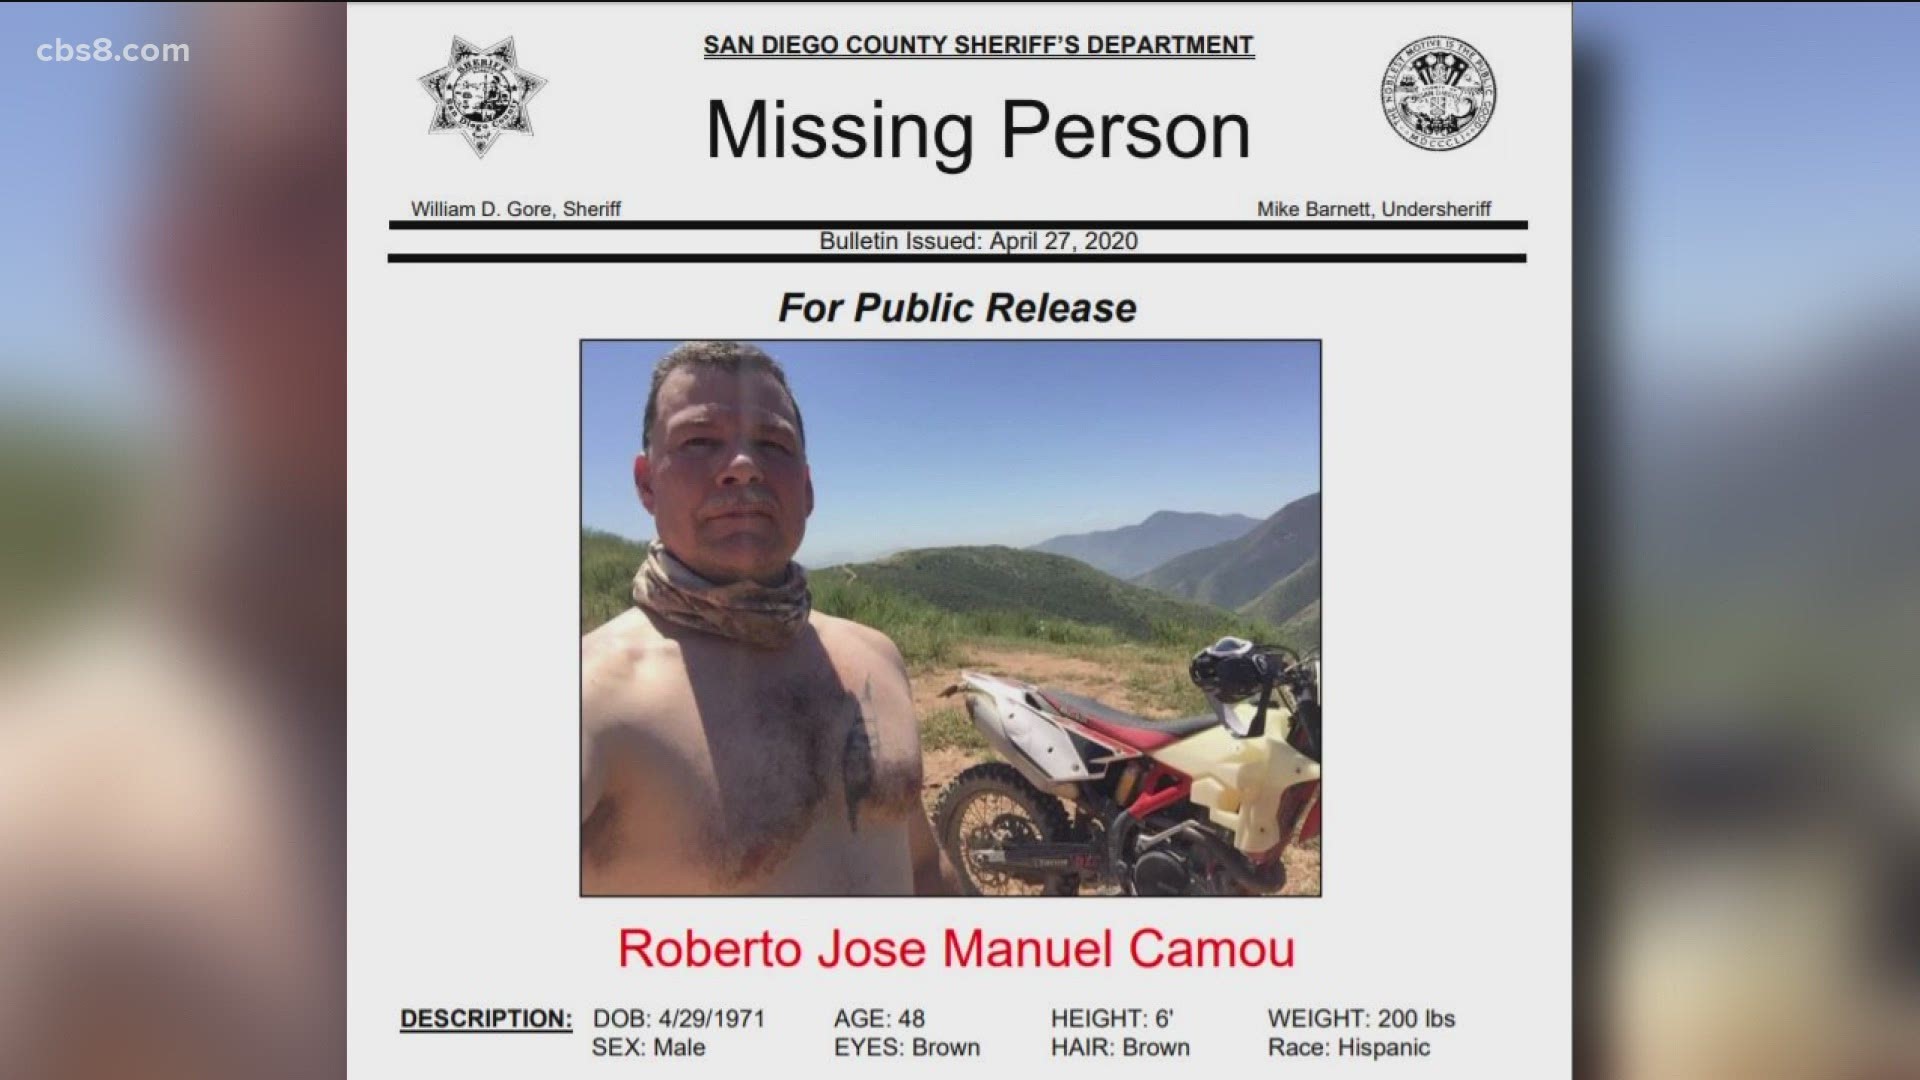 San Diego Sheriff's search and rescue team has been leading the effort to locate 48-year-old Bobby Camou.